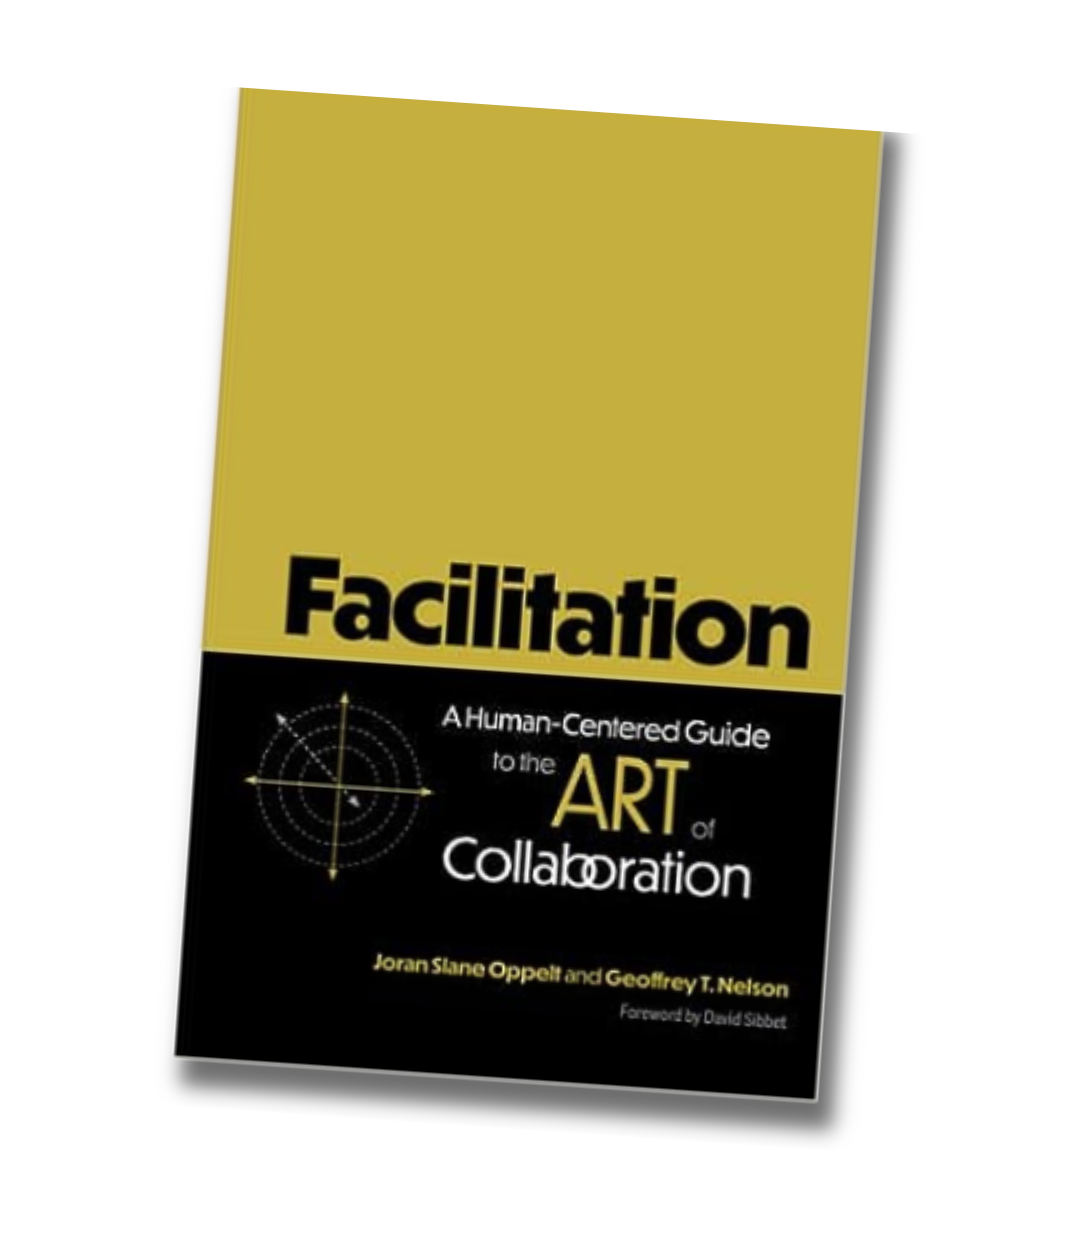 Facilitation is the fully-illustrated, definitive resource on how to facilitate groups and design collaboration. 